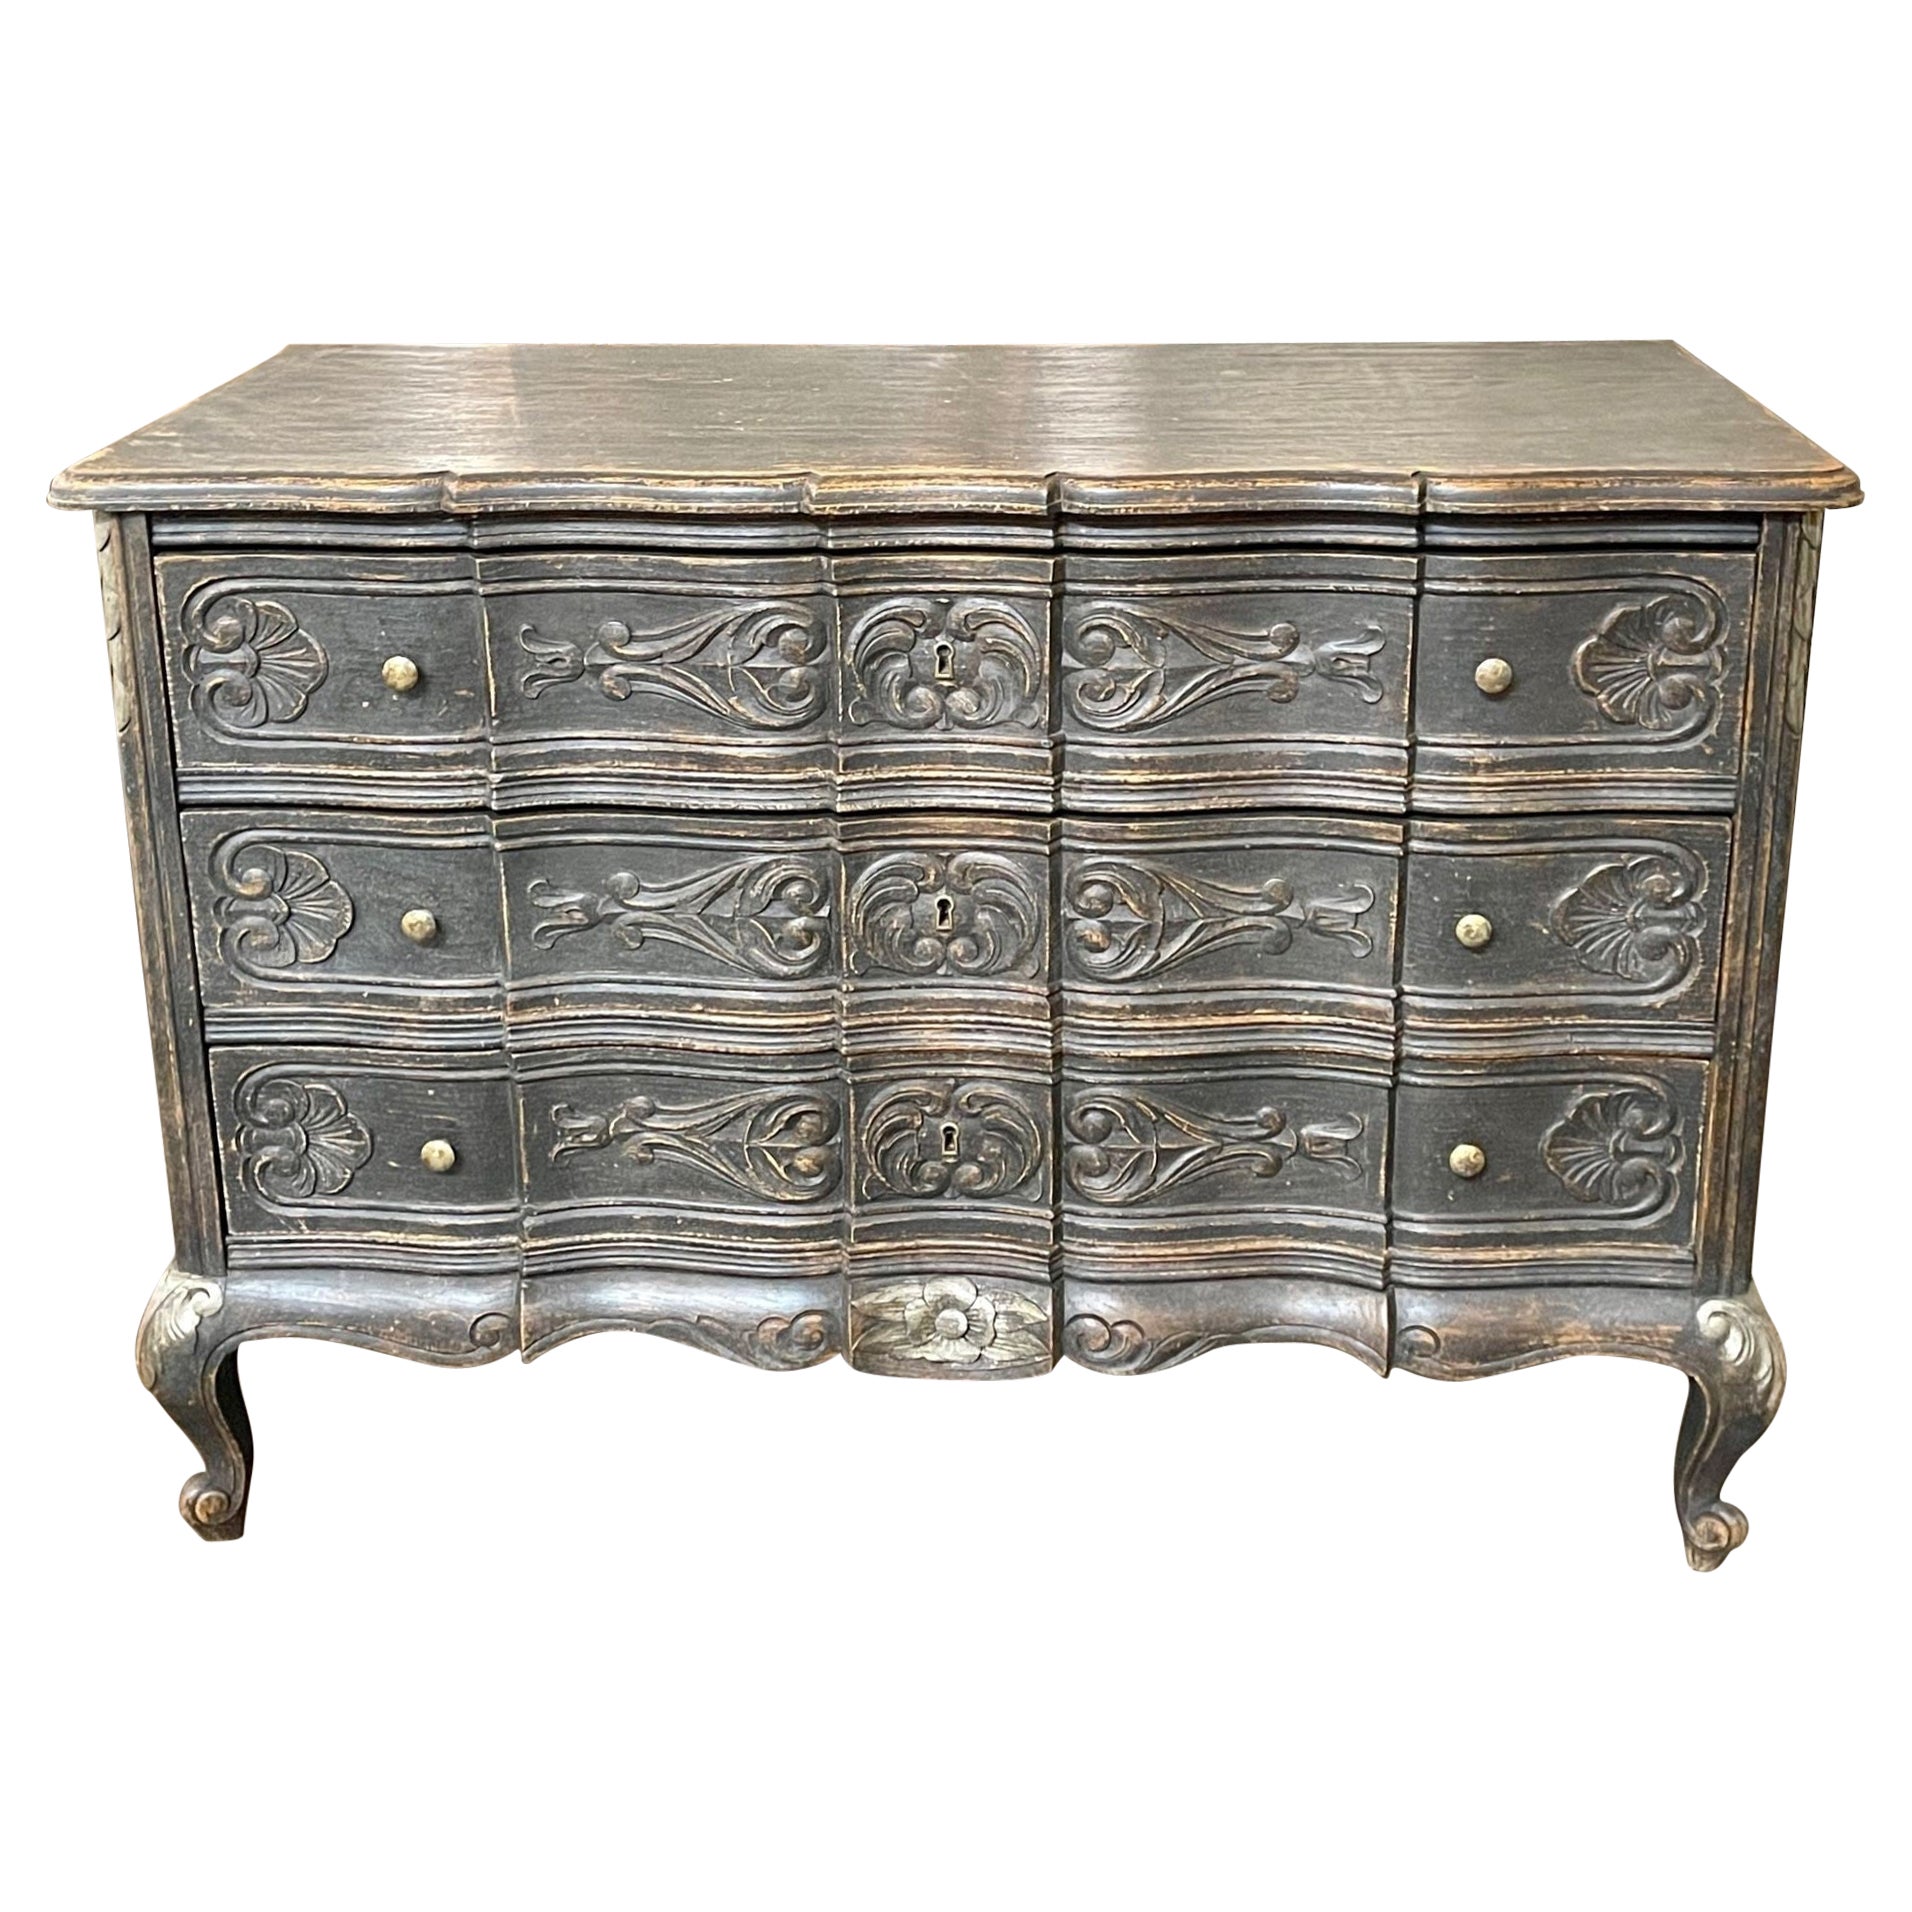 19th Century French Carved and Painted Bedside Chest